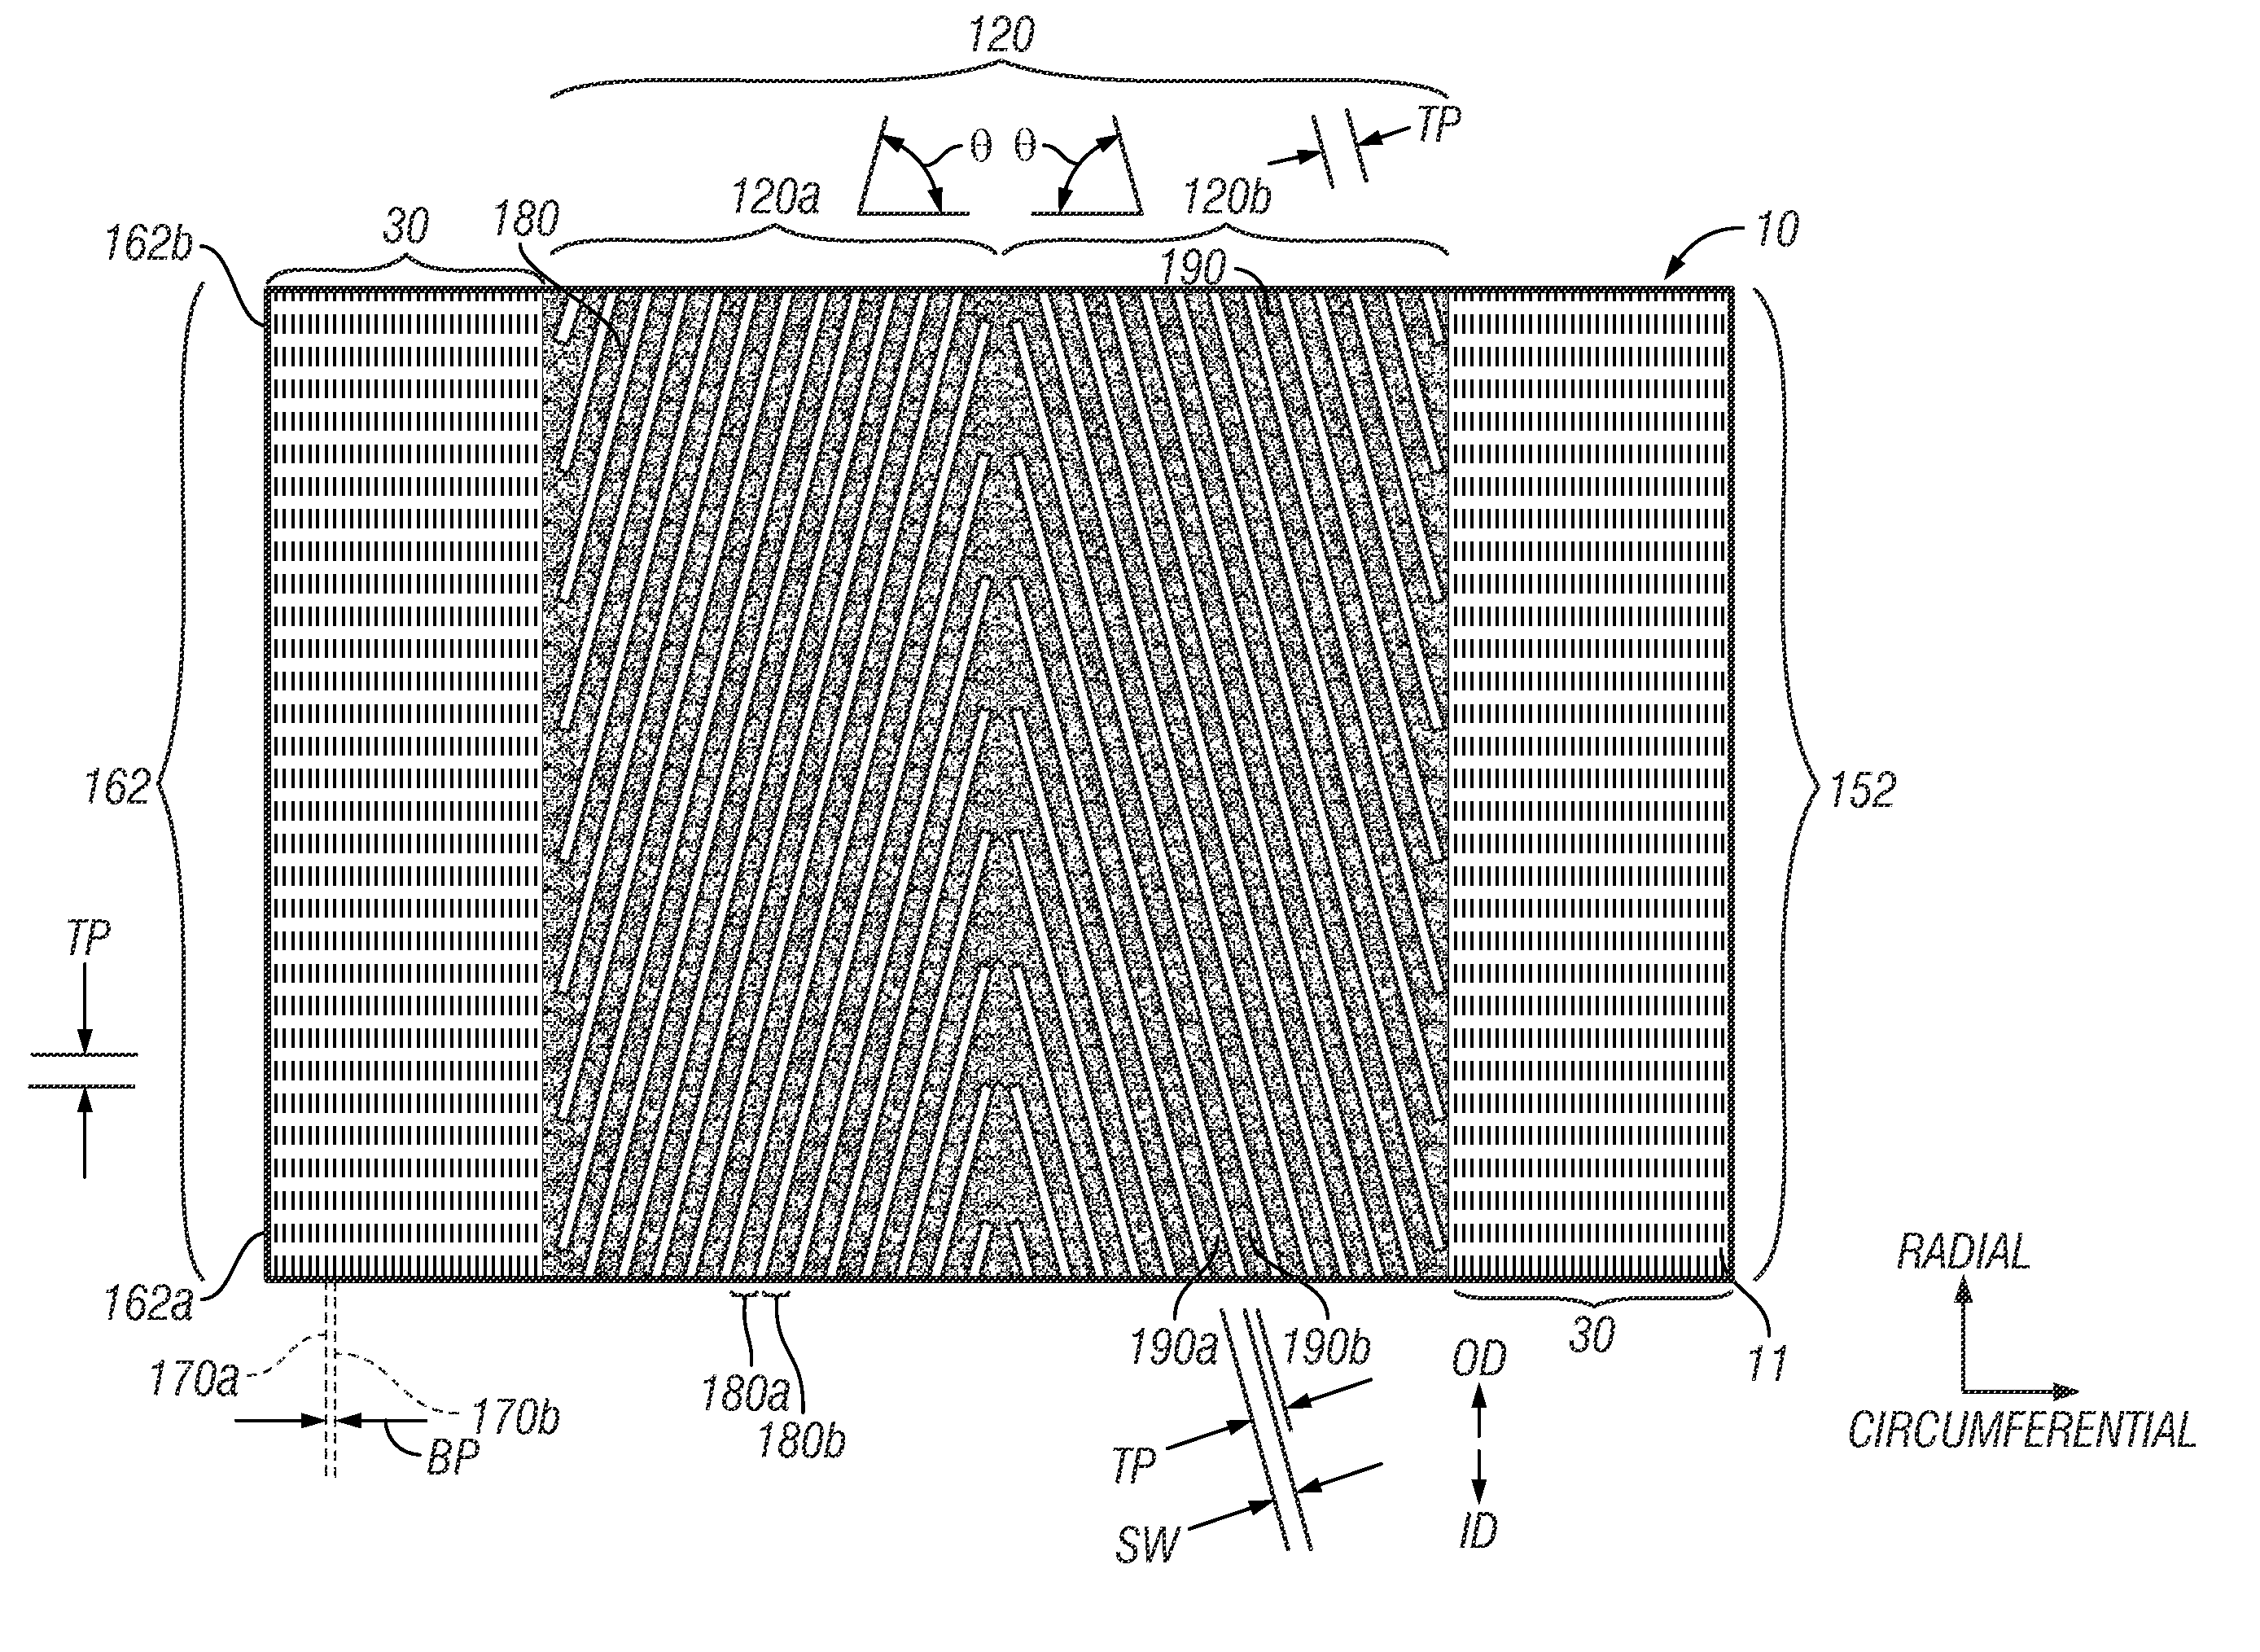 Method using block copolymers for making a master mold for nanoimprinting patterned magnetic recording disks with chevron servo patterns